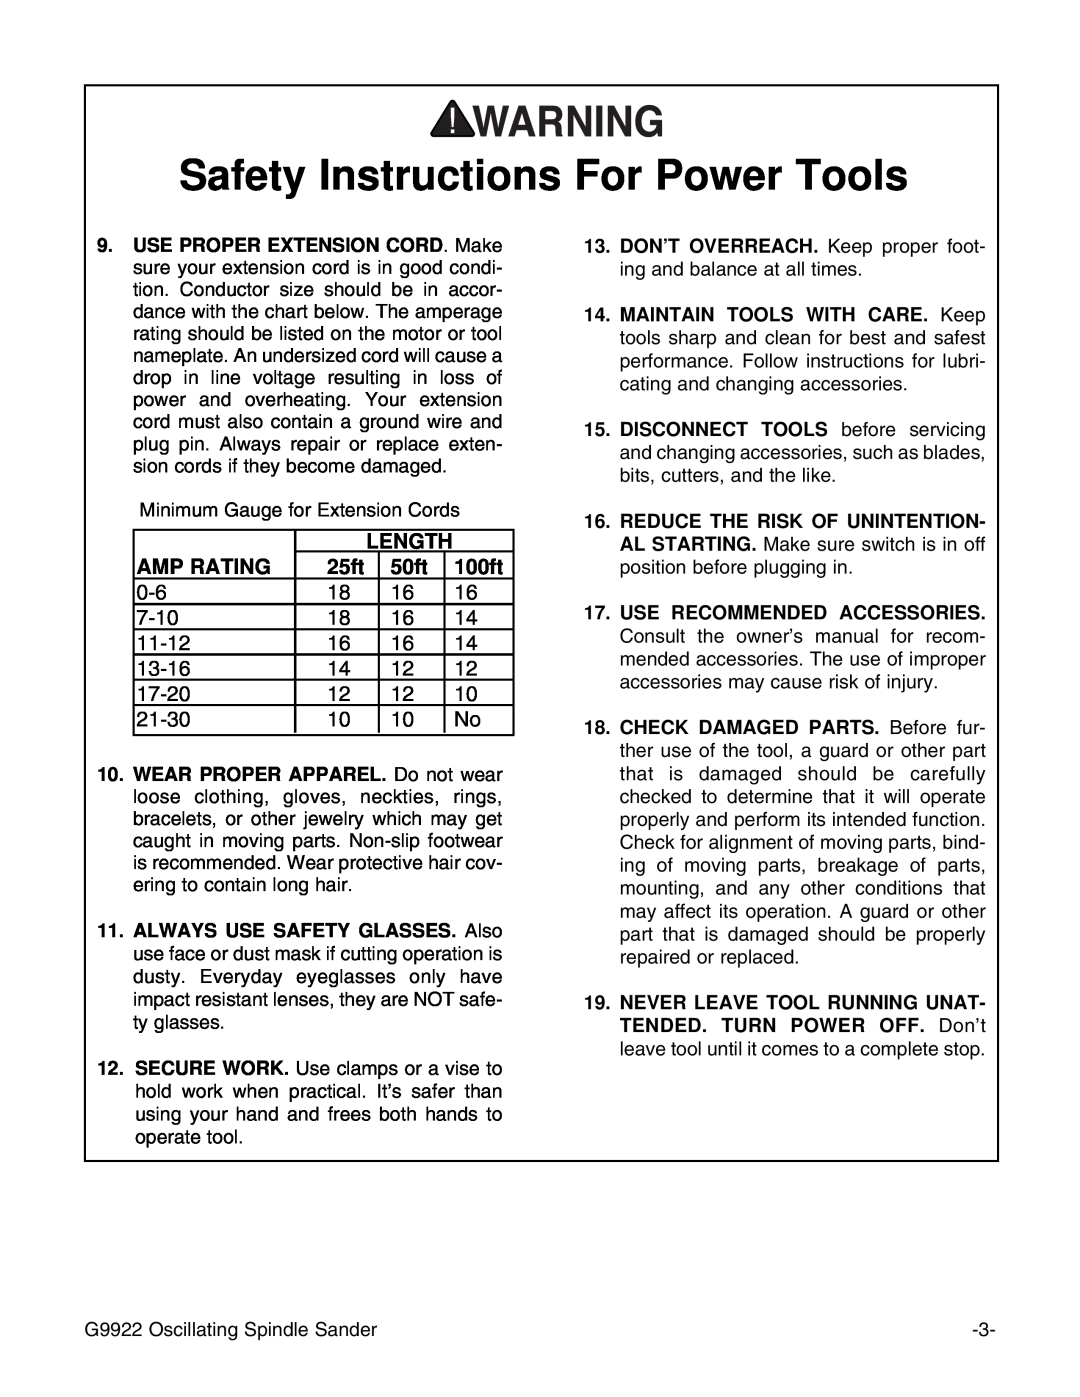 Grizzly G9922 instruction manual Safety Instructions For Power Tools, Length, Amp Rating, 25ft, 50ft, 100ft 